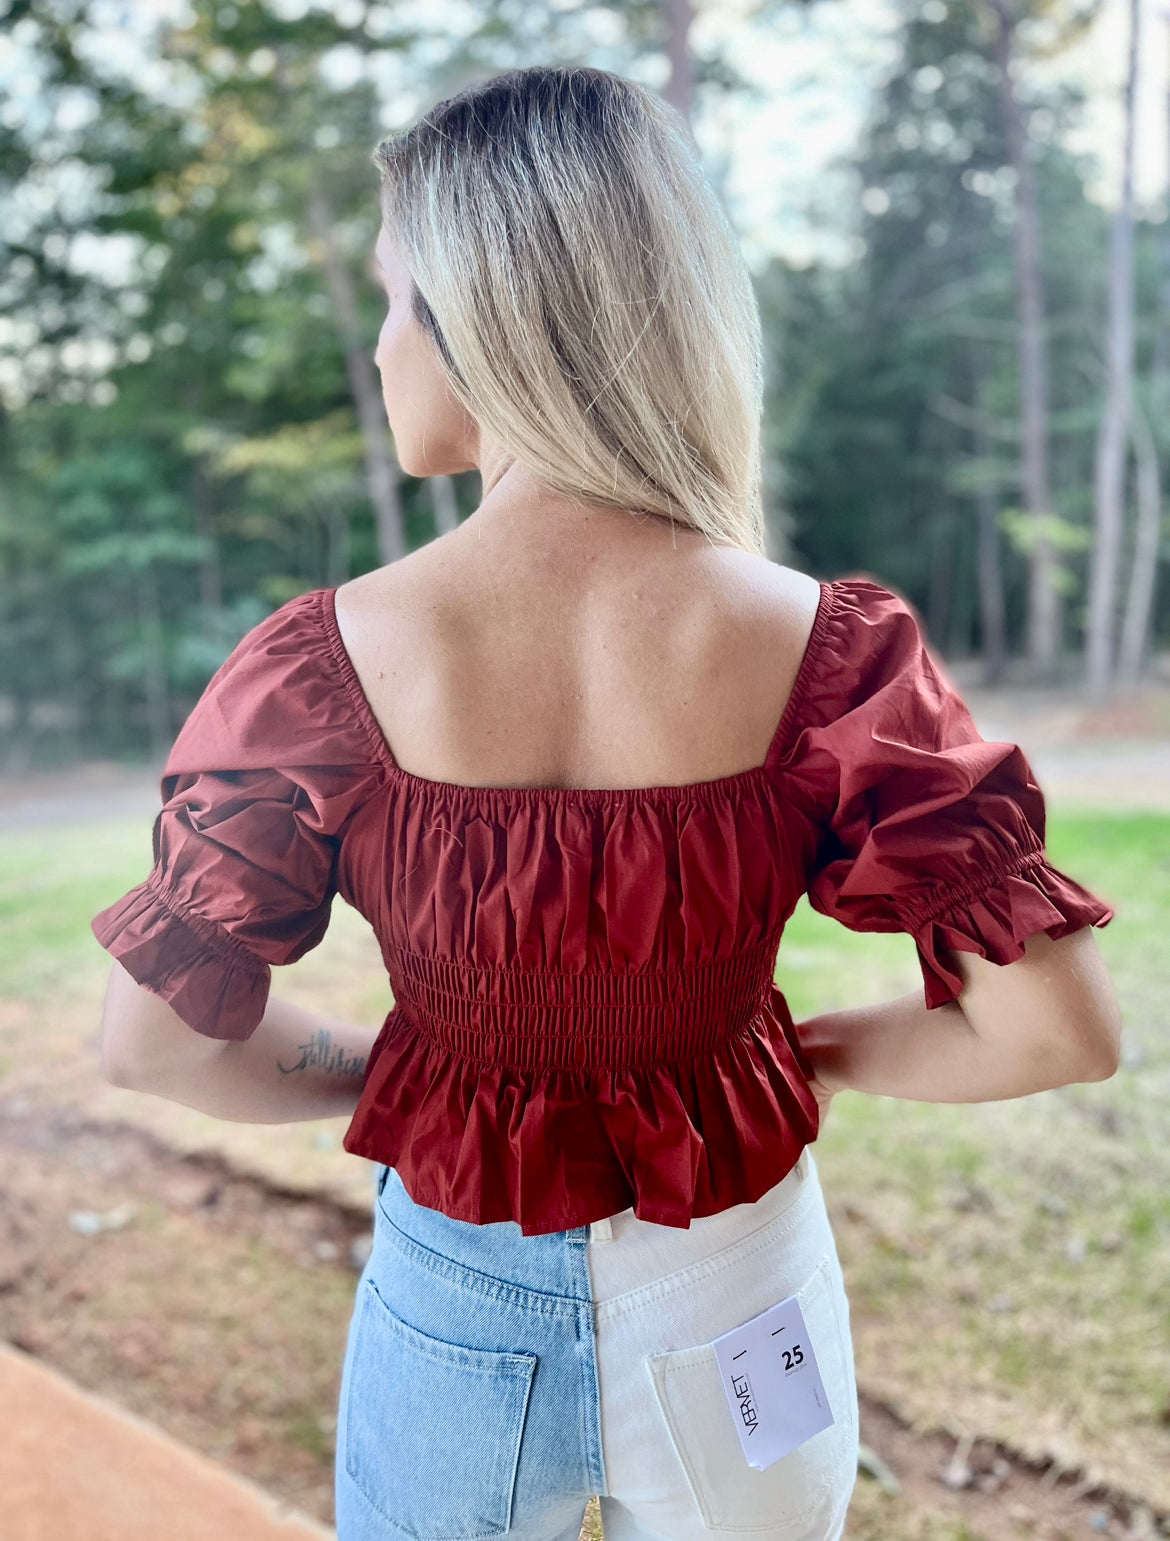 Instantly Lovable Red Puff Sleeve Top